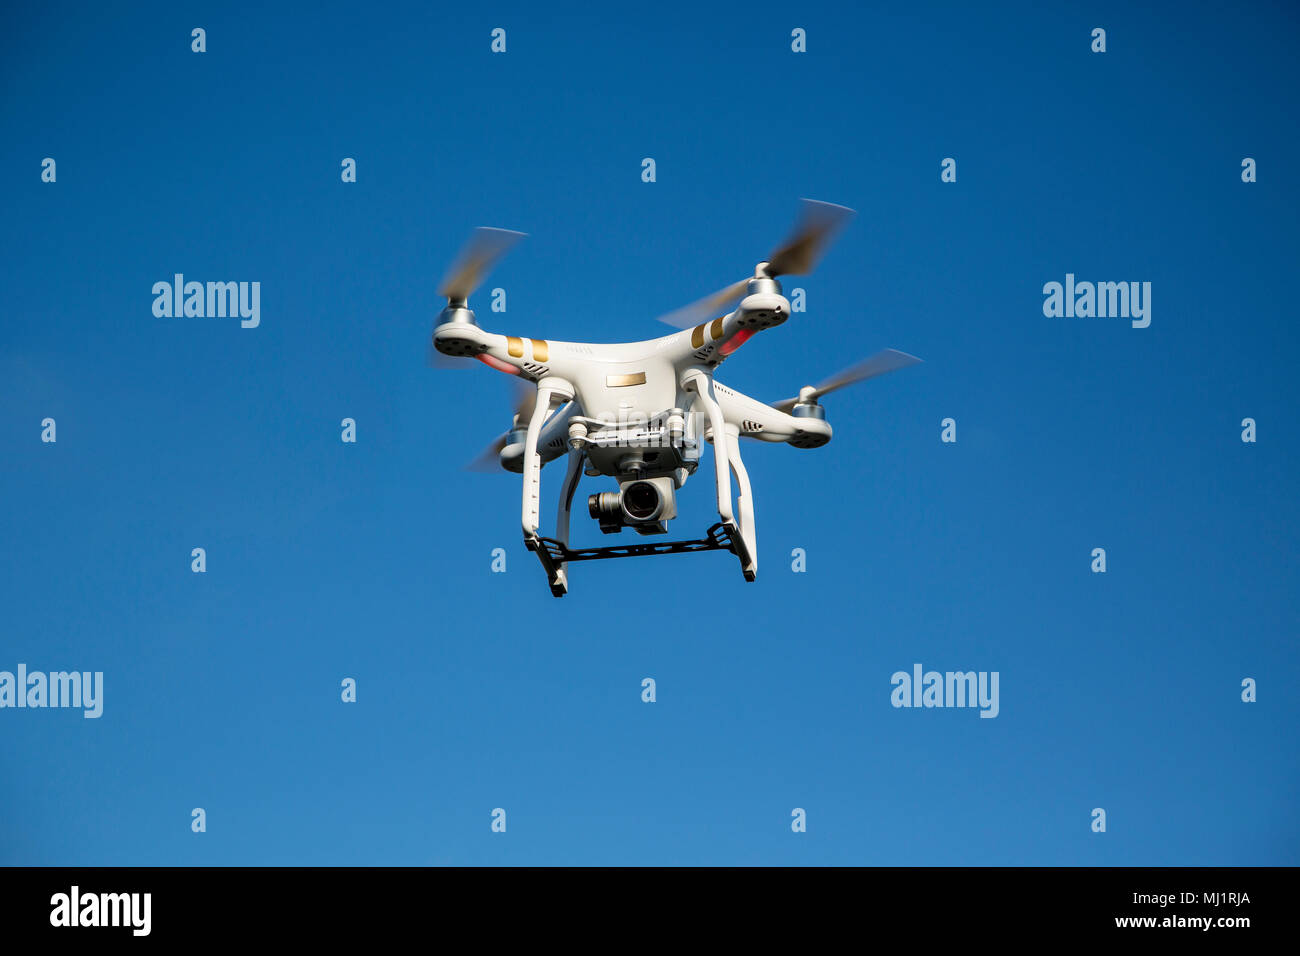 Drone in flight against blue sky Stock Photo